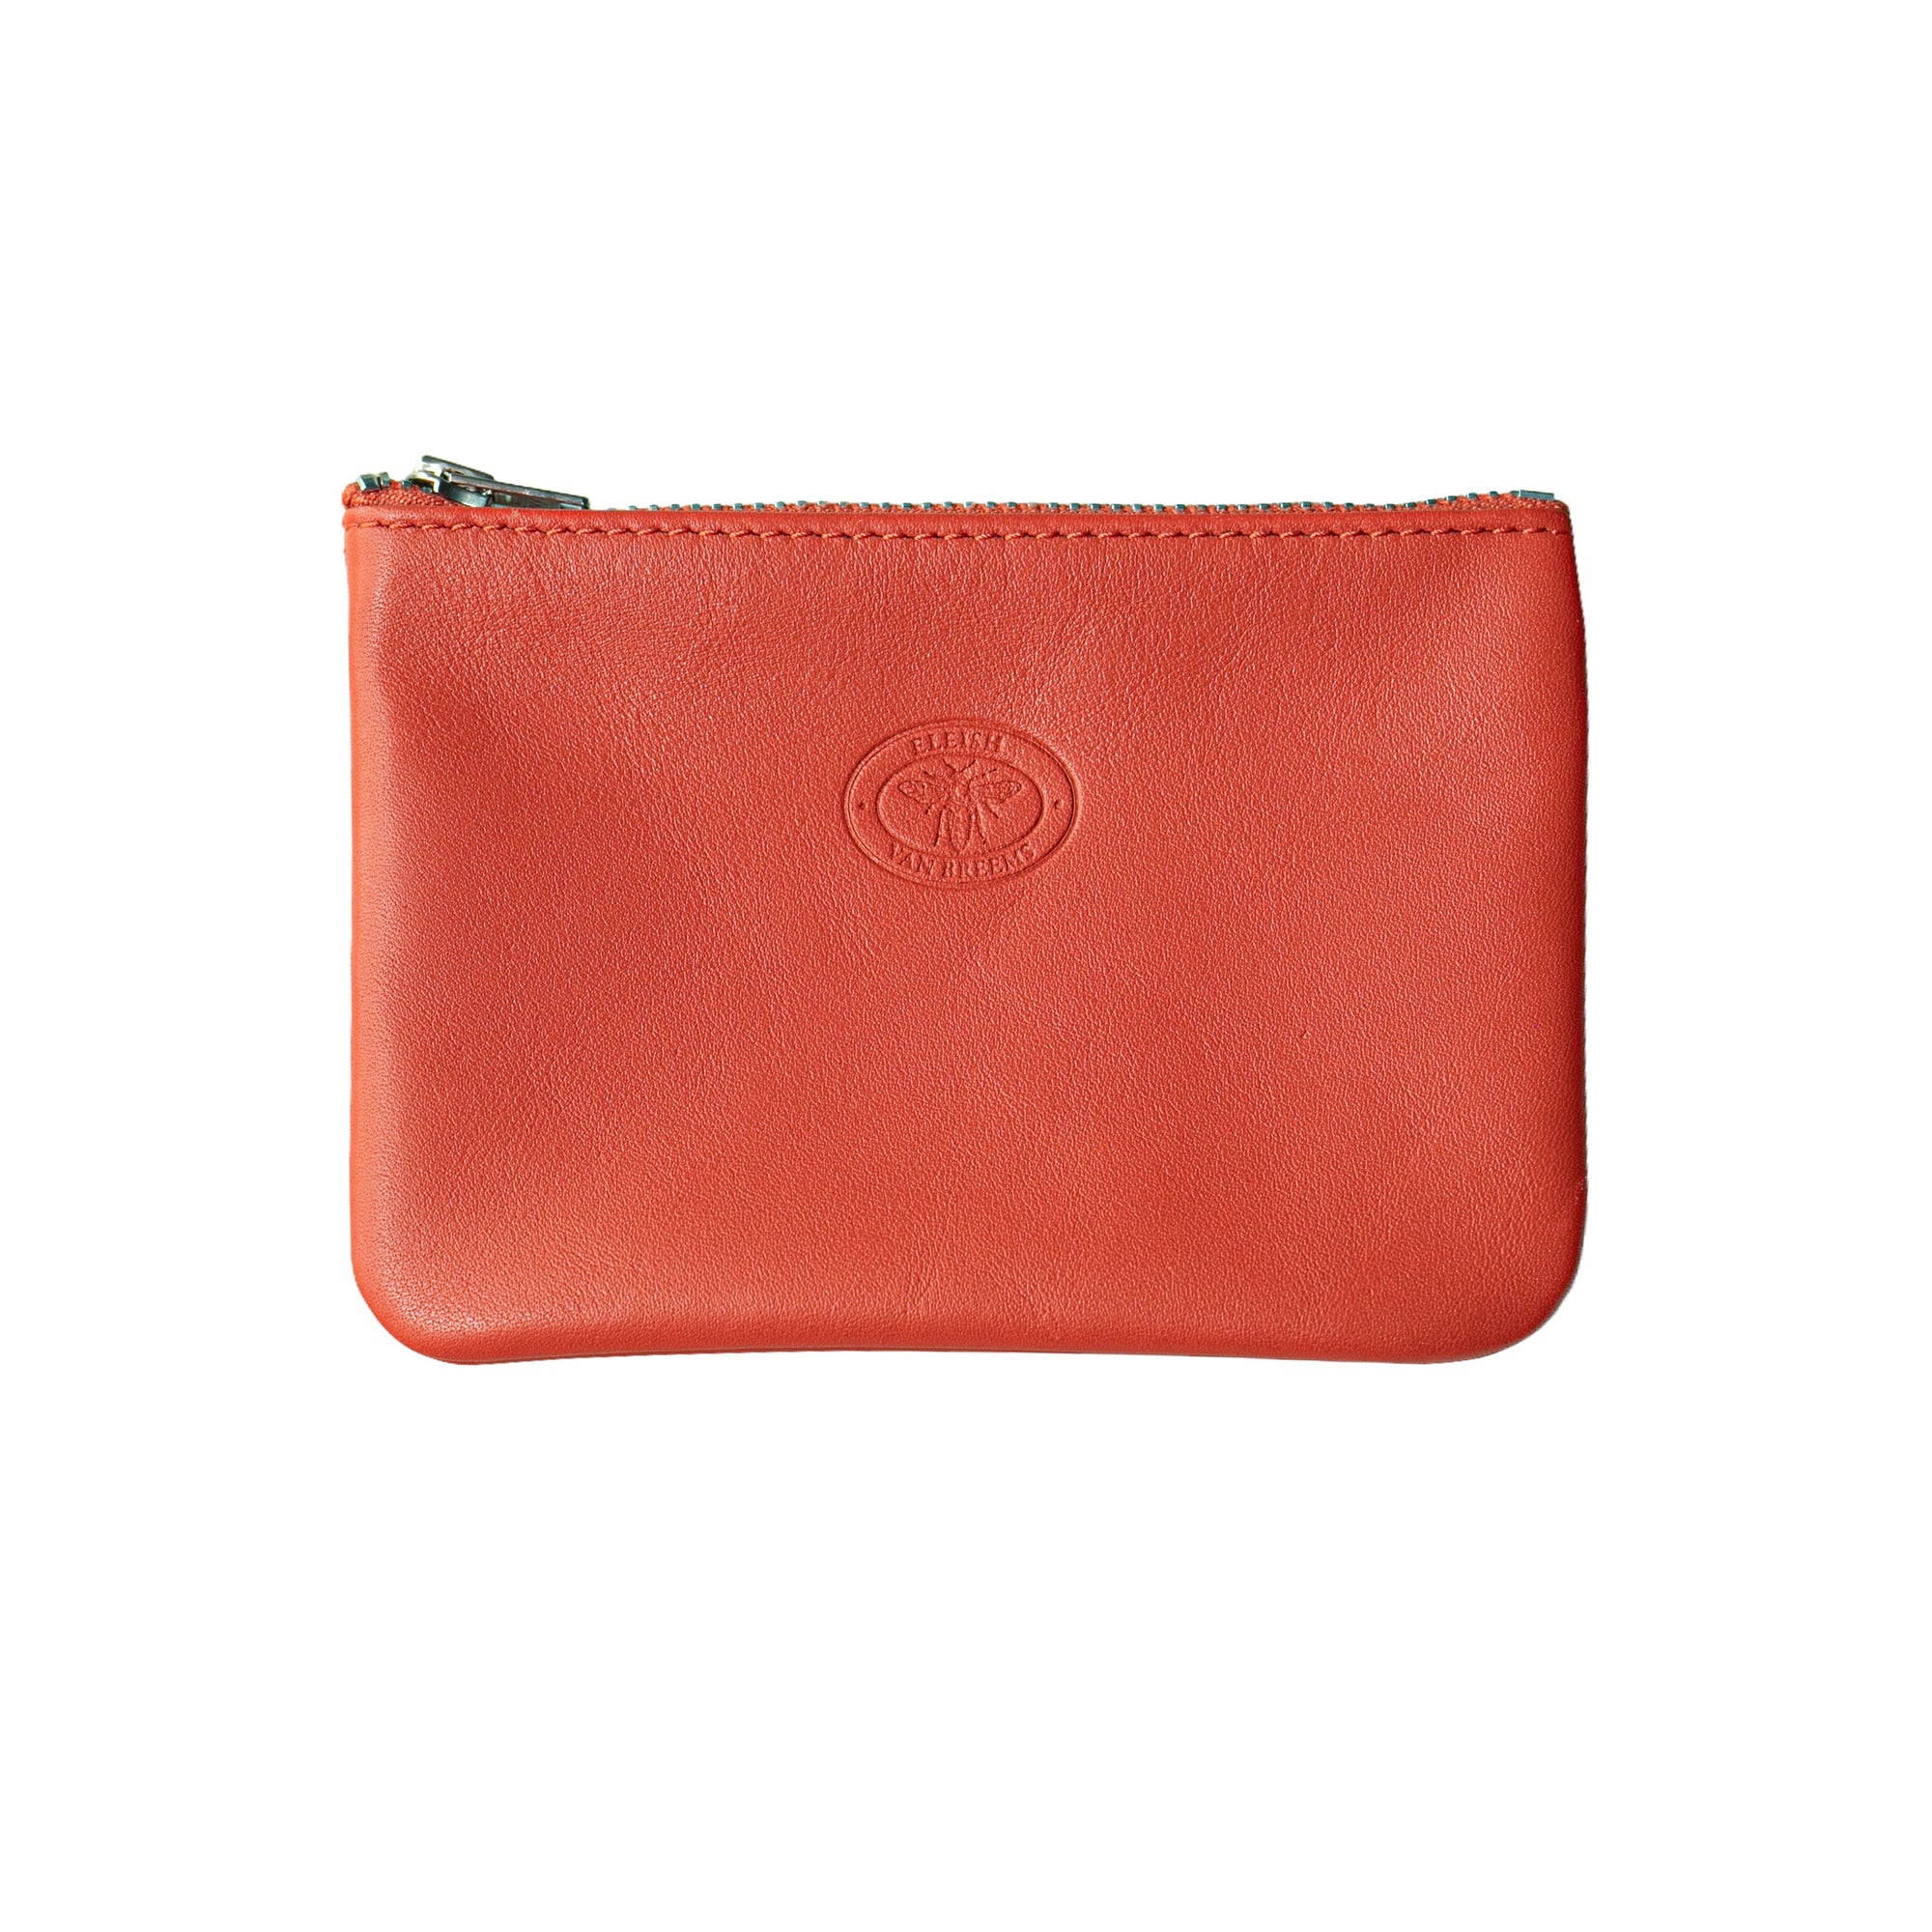 Folly Small Leather Pouch Clutch - Eleish Van Breems Home